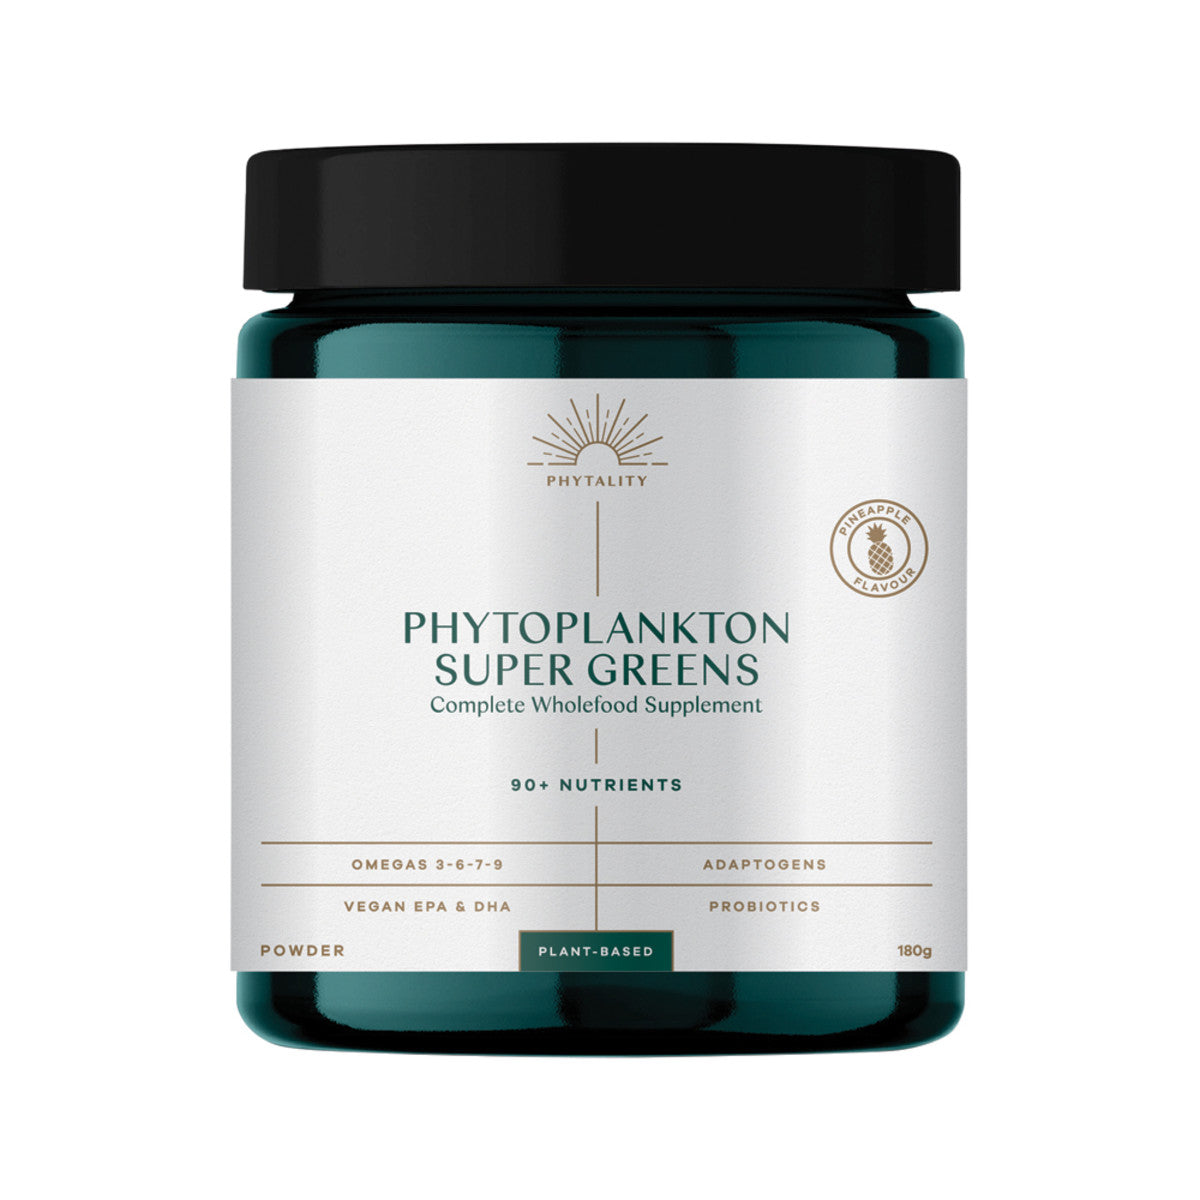 Phytoplankton Super Greens - Complete Wholefood Supplement